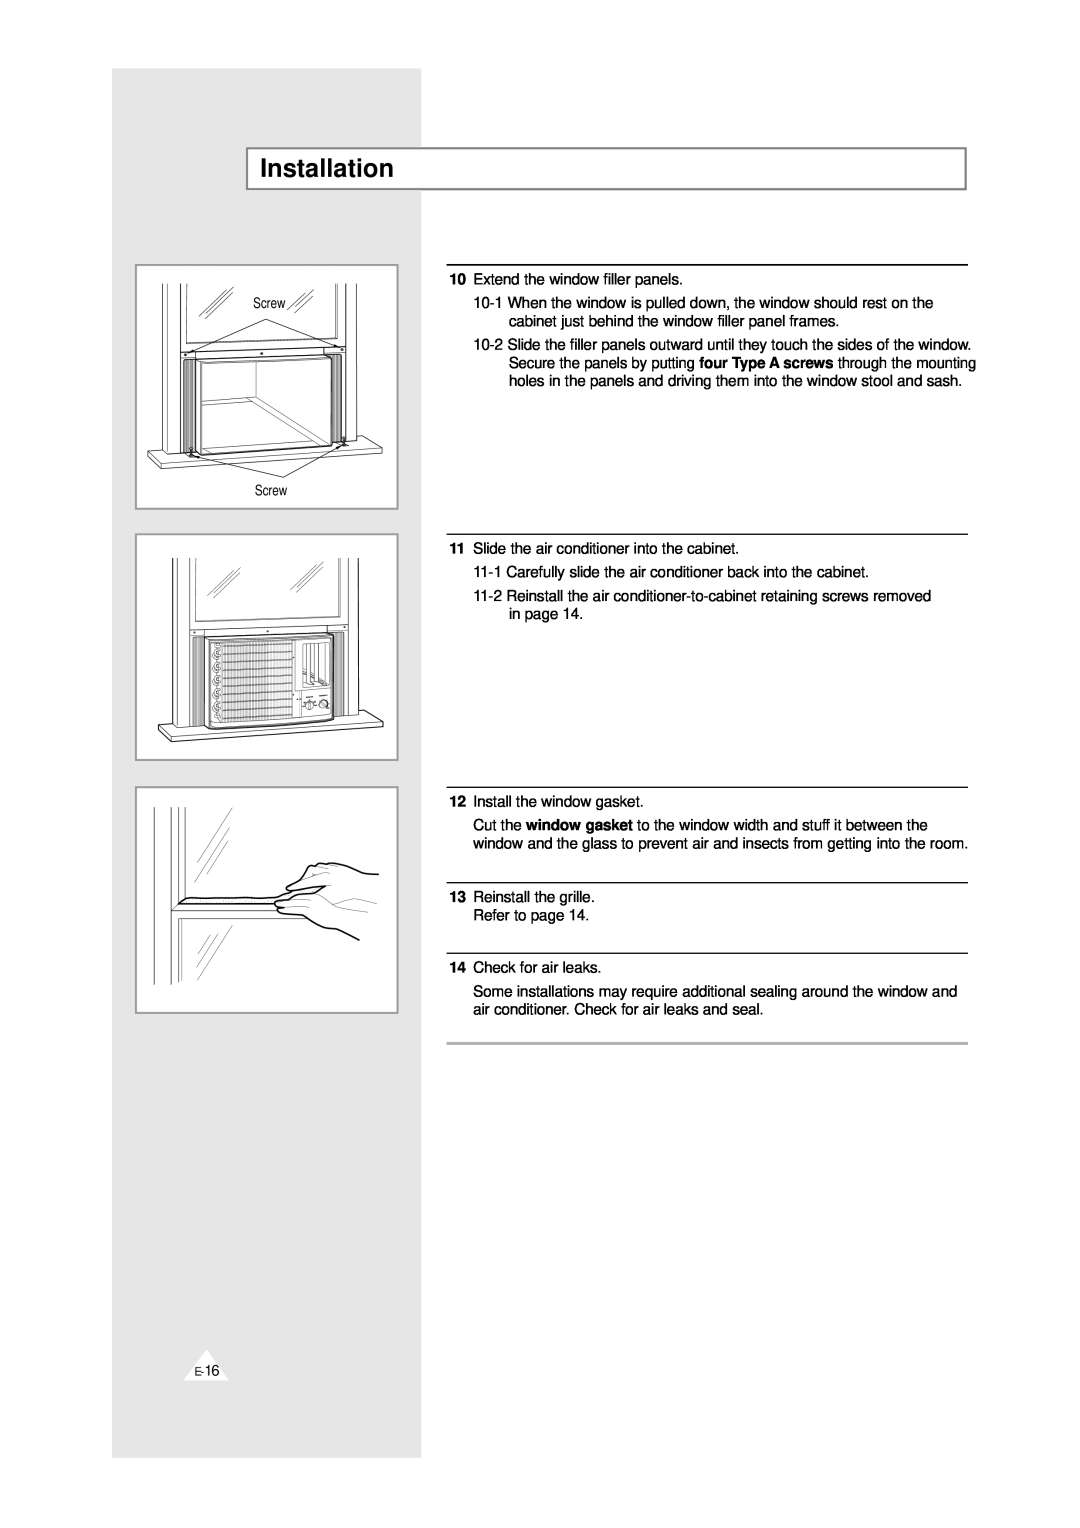 Samsung AW0719, AW0819 manual Installation, 10Extend the window filler panels 